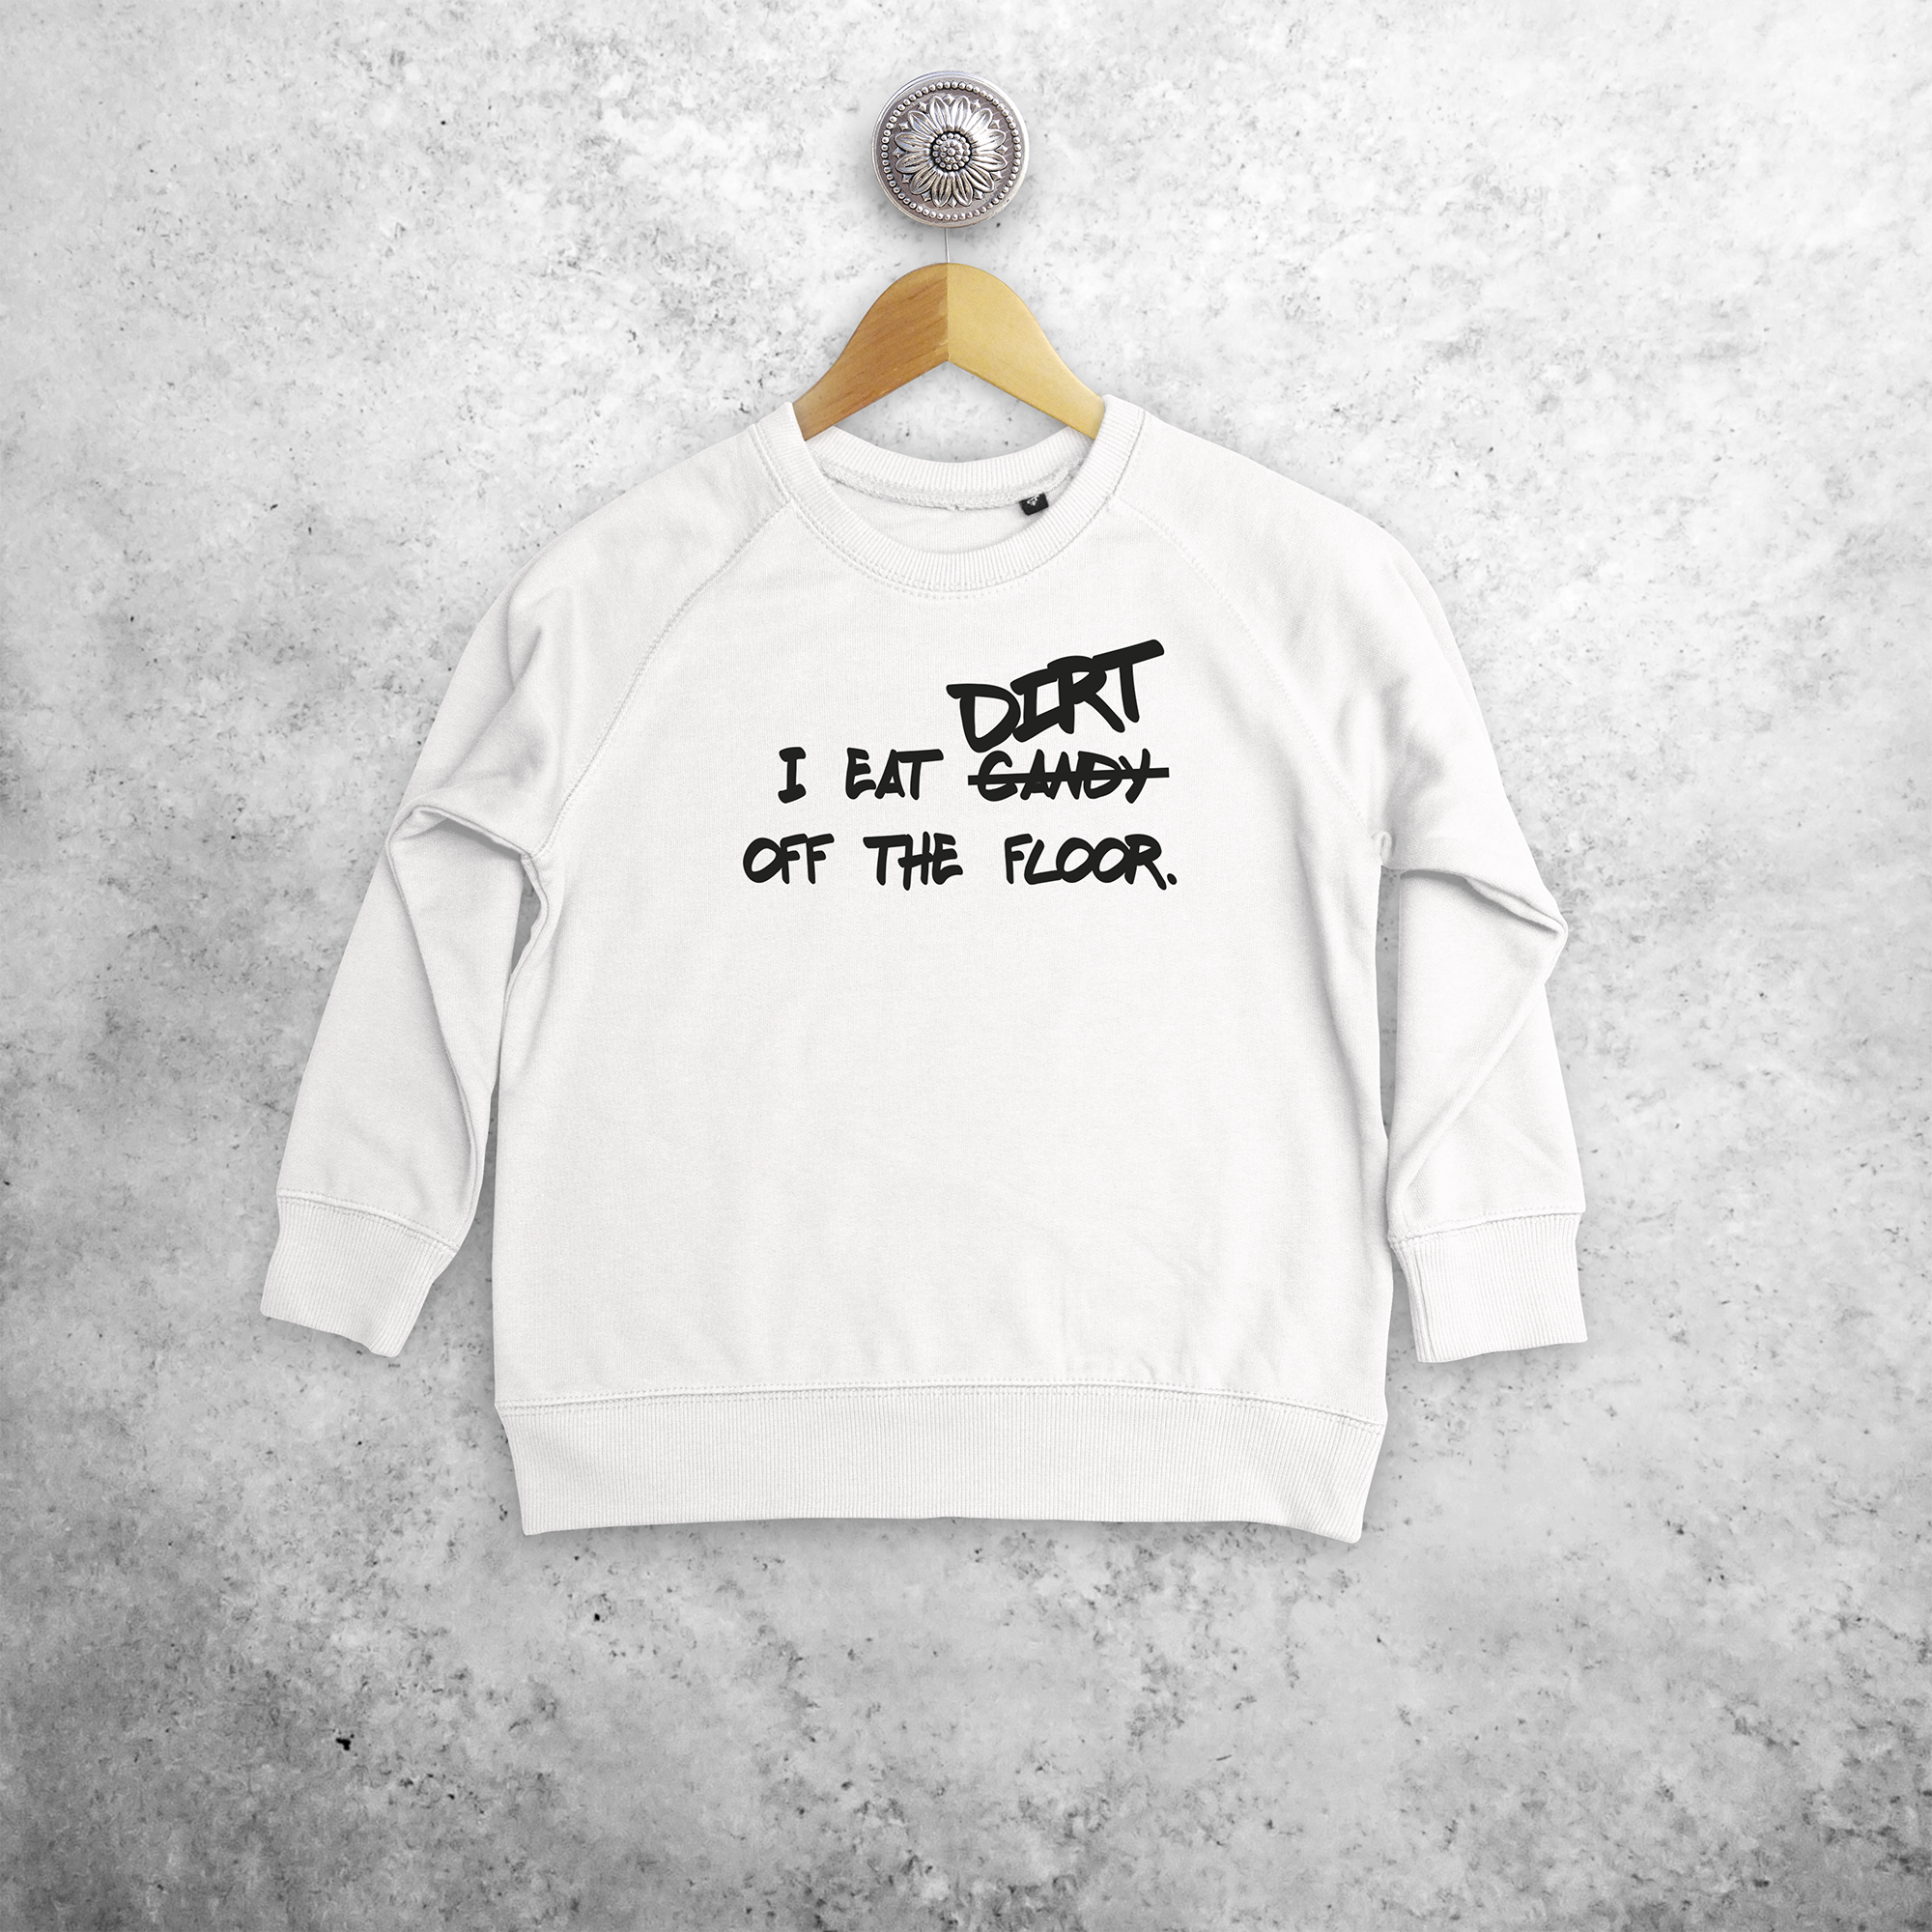 'I eat candy/dirt off the floor.' kids sweater